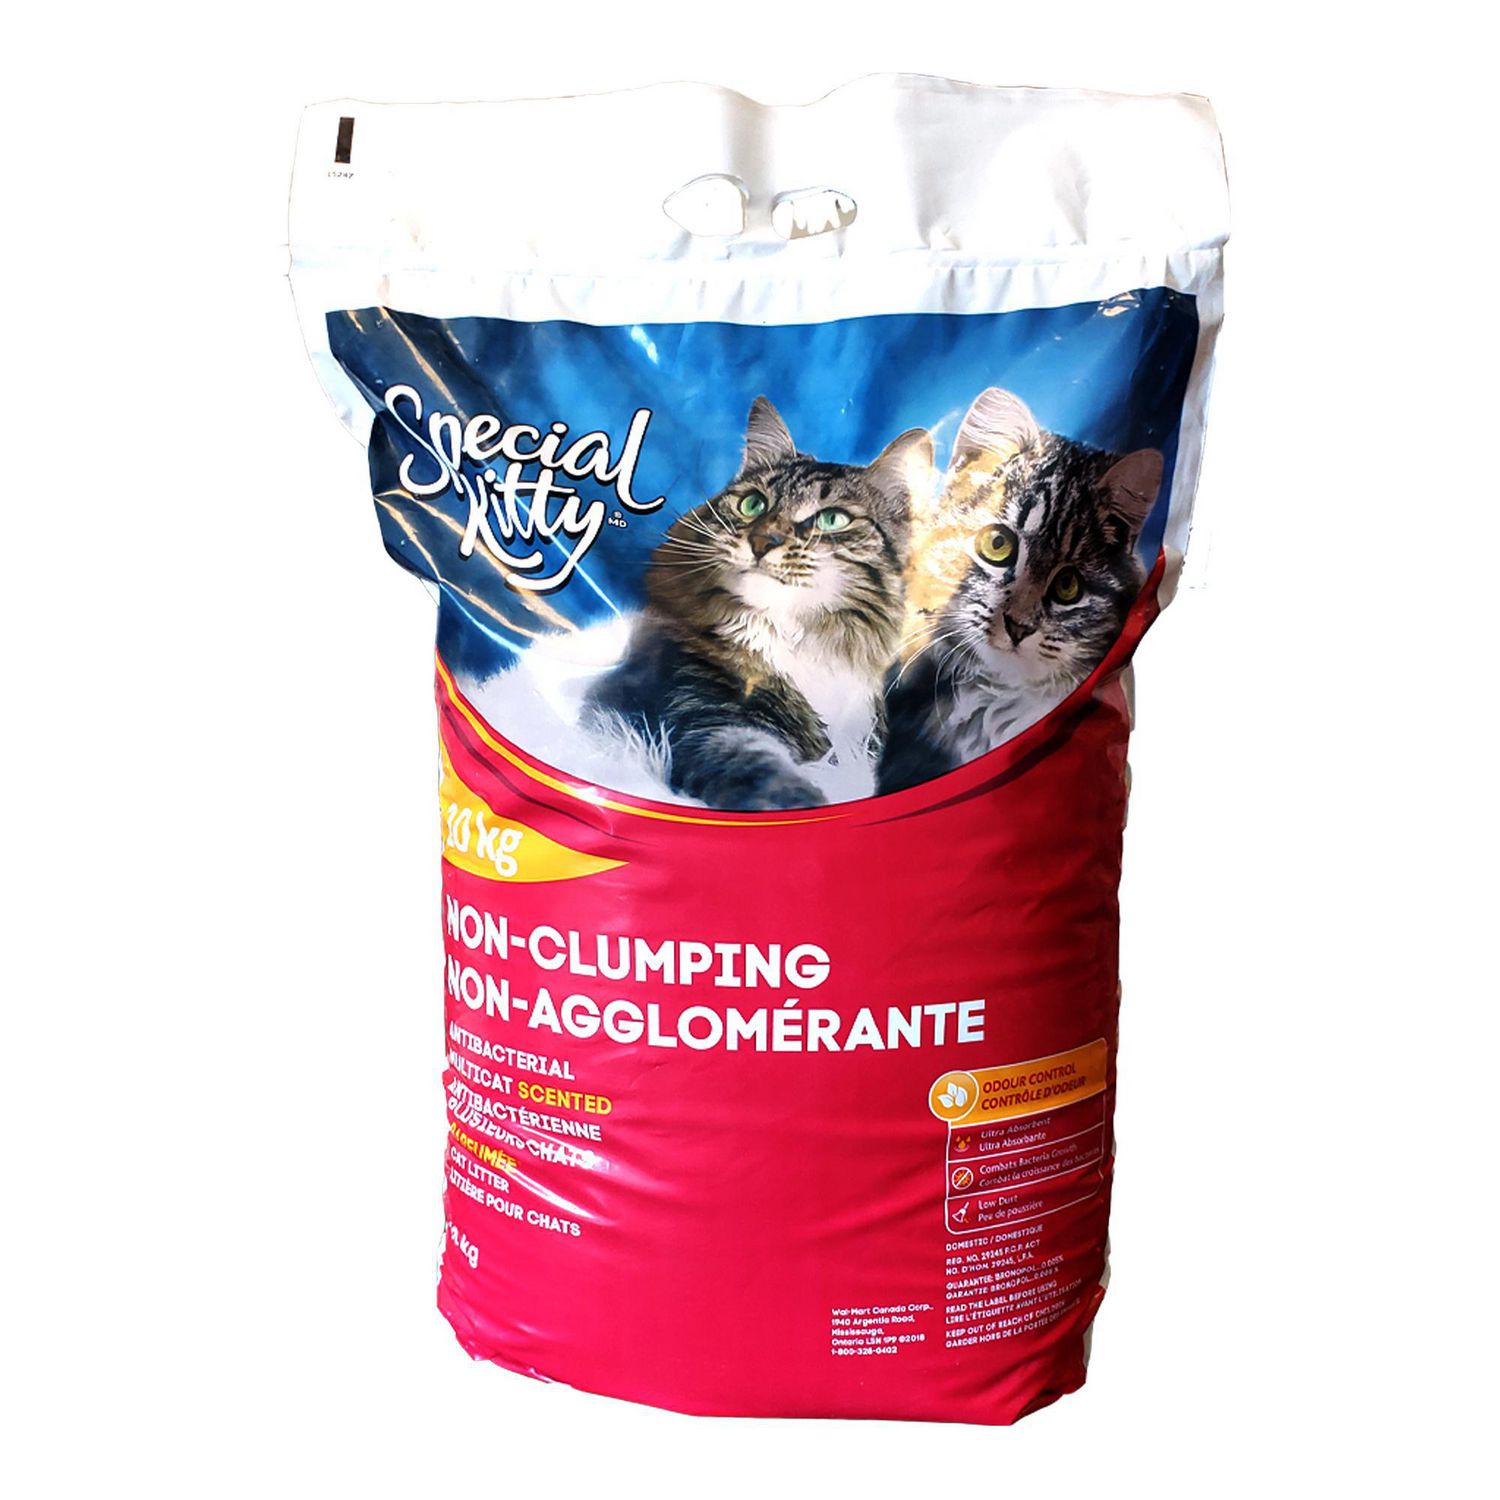 WalMart Special Kitty AntiBacterial Scented Traditional Cat Litter